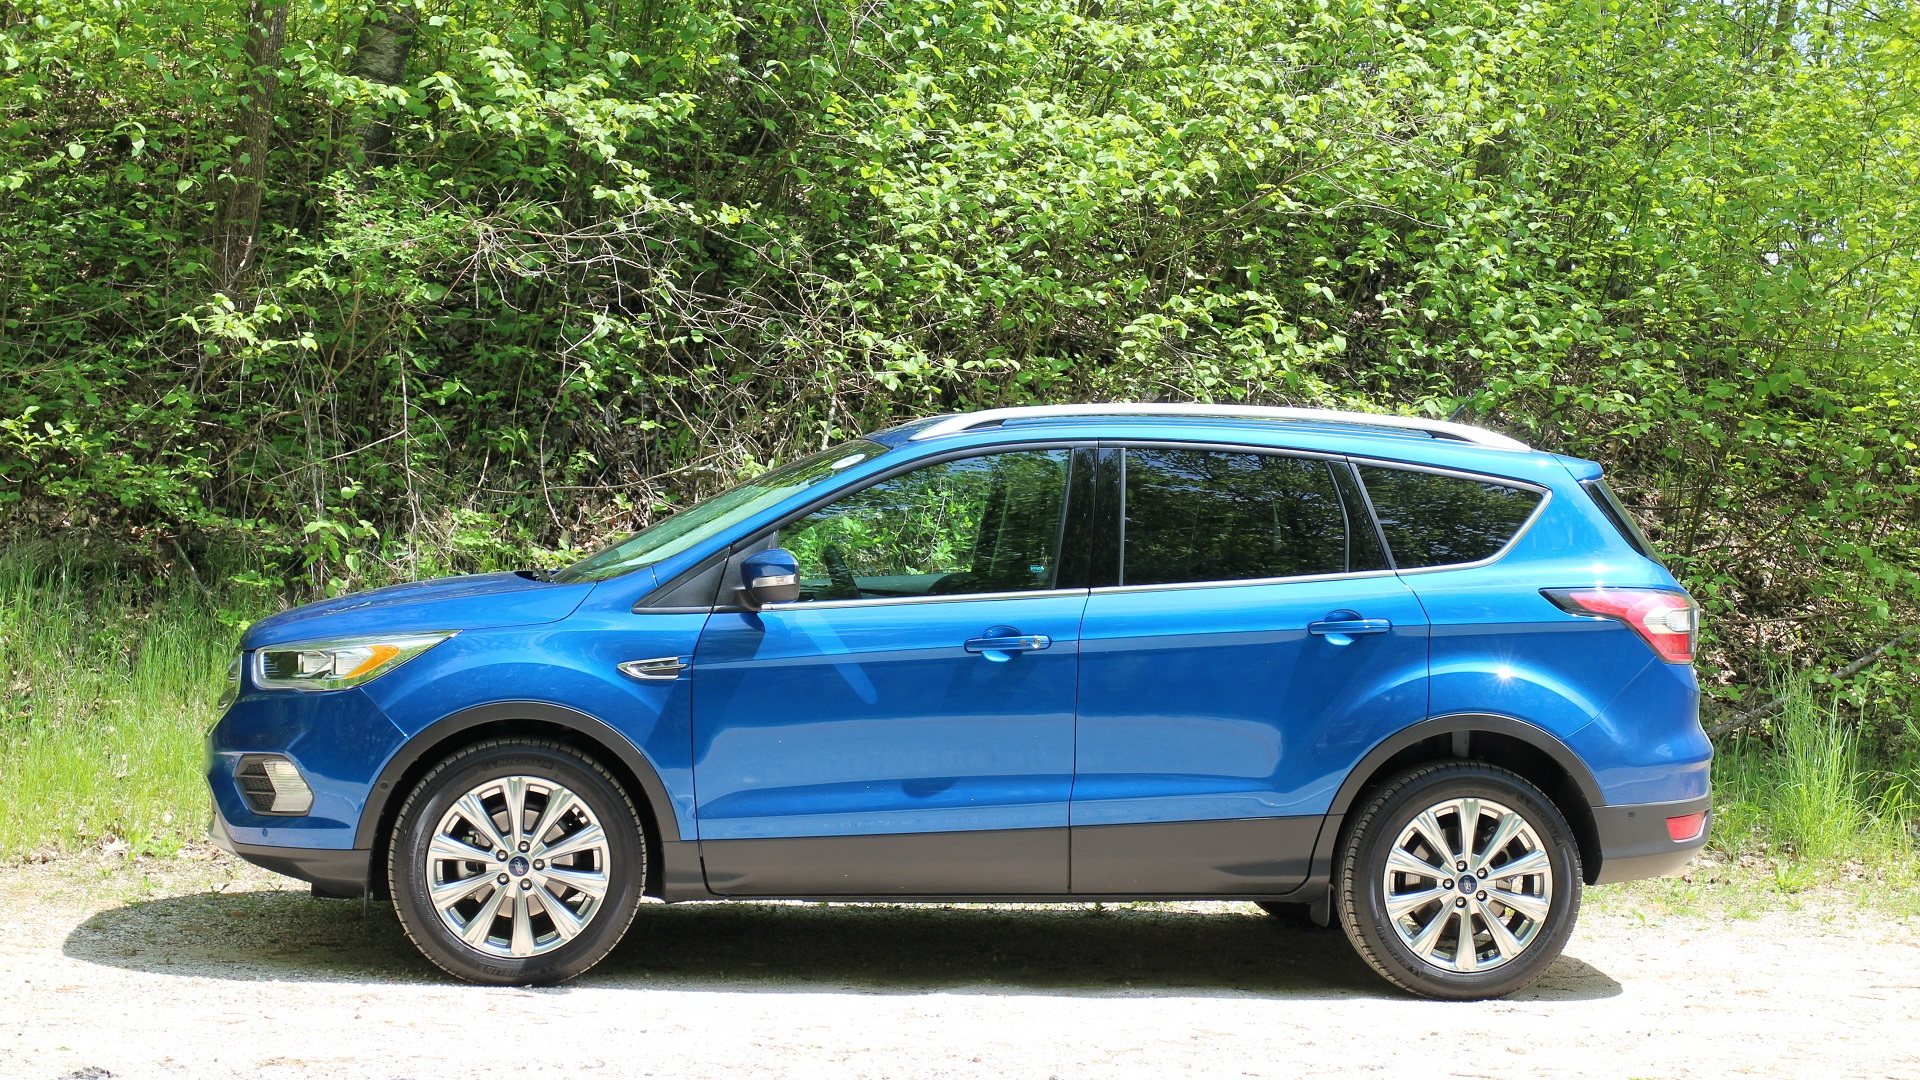 2017 Ford Escape, Elkhart Lake, Wisconsin, May 2016